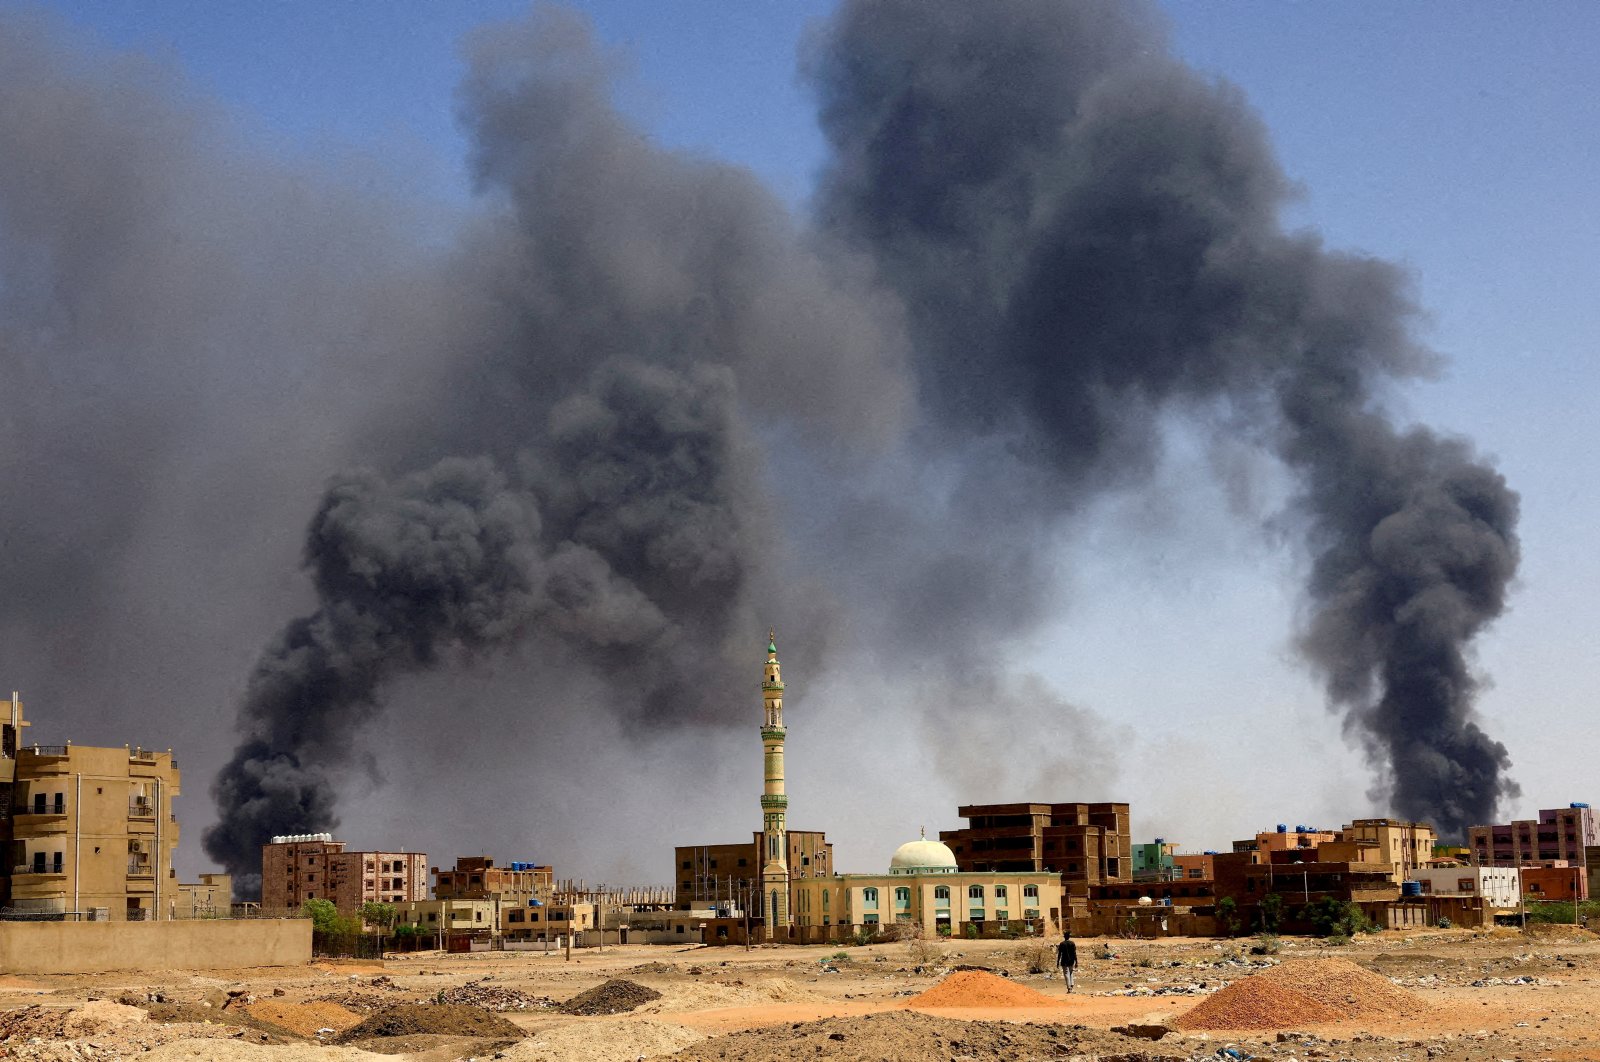 A man walks while smoke rises above buildings after aerial bombardments during clashes between the paramilitary Rapid Support Forces and the army in Khartoum North, Sudan, May 1, 2023. (Reuters File Photo)